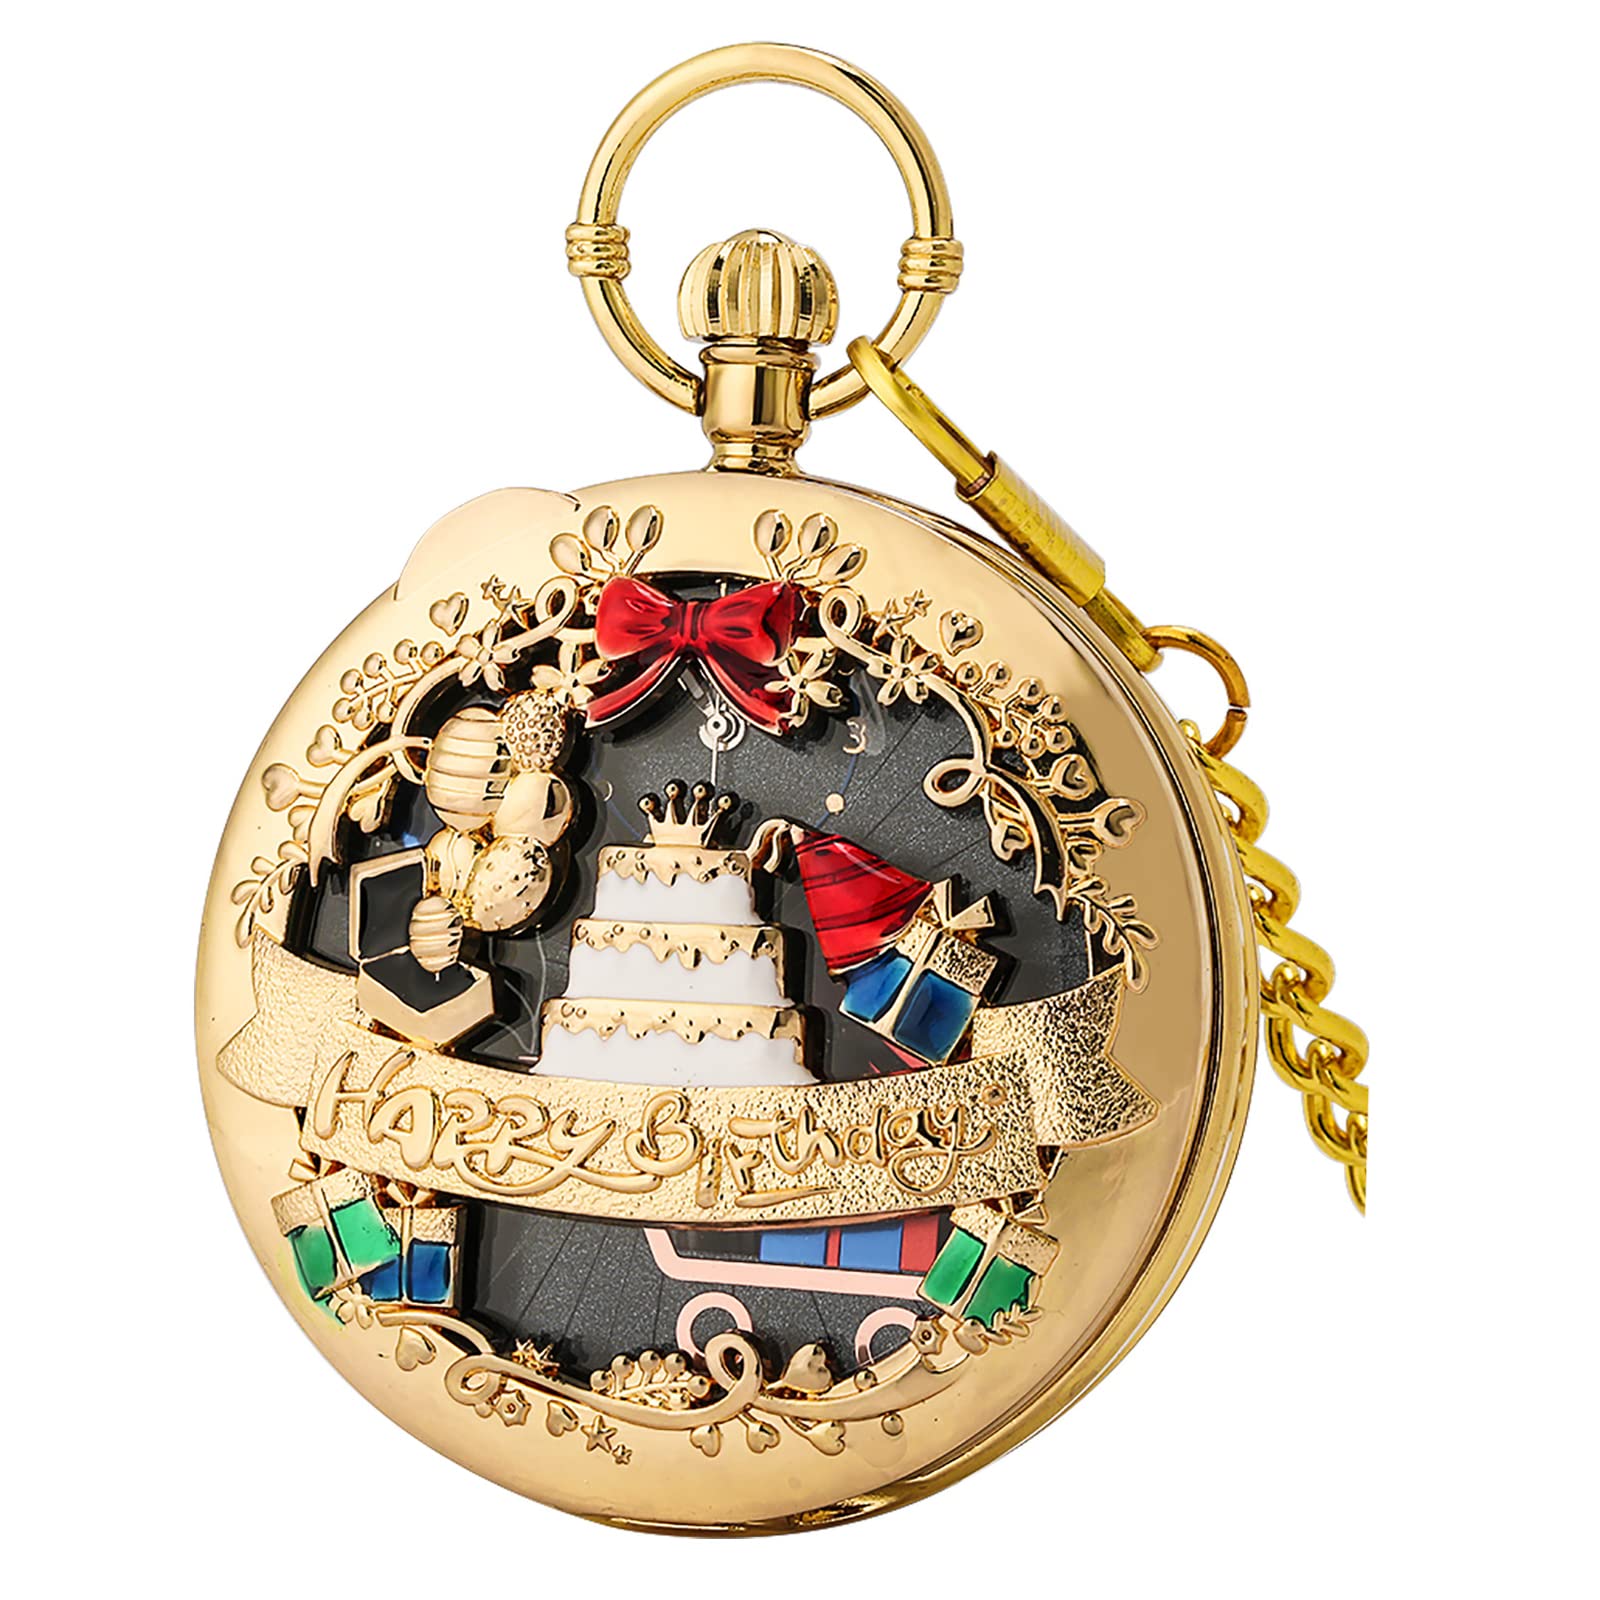 FUNGORGT Musical Pocket Watch Hand Crank Music Quartz Pocket Watch Unique Fob Playing Music Pocket Watch Dad Gifts for Birthday Christmas Gifts